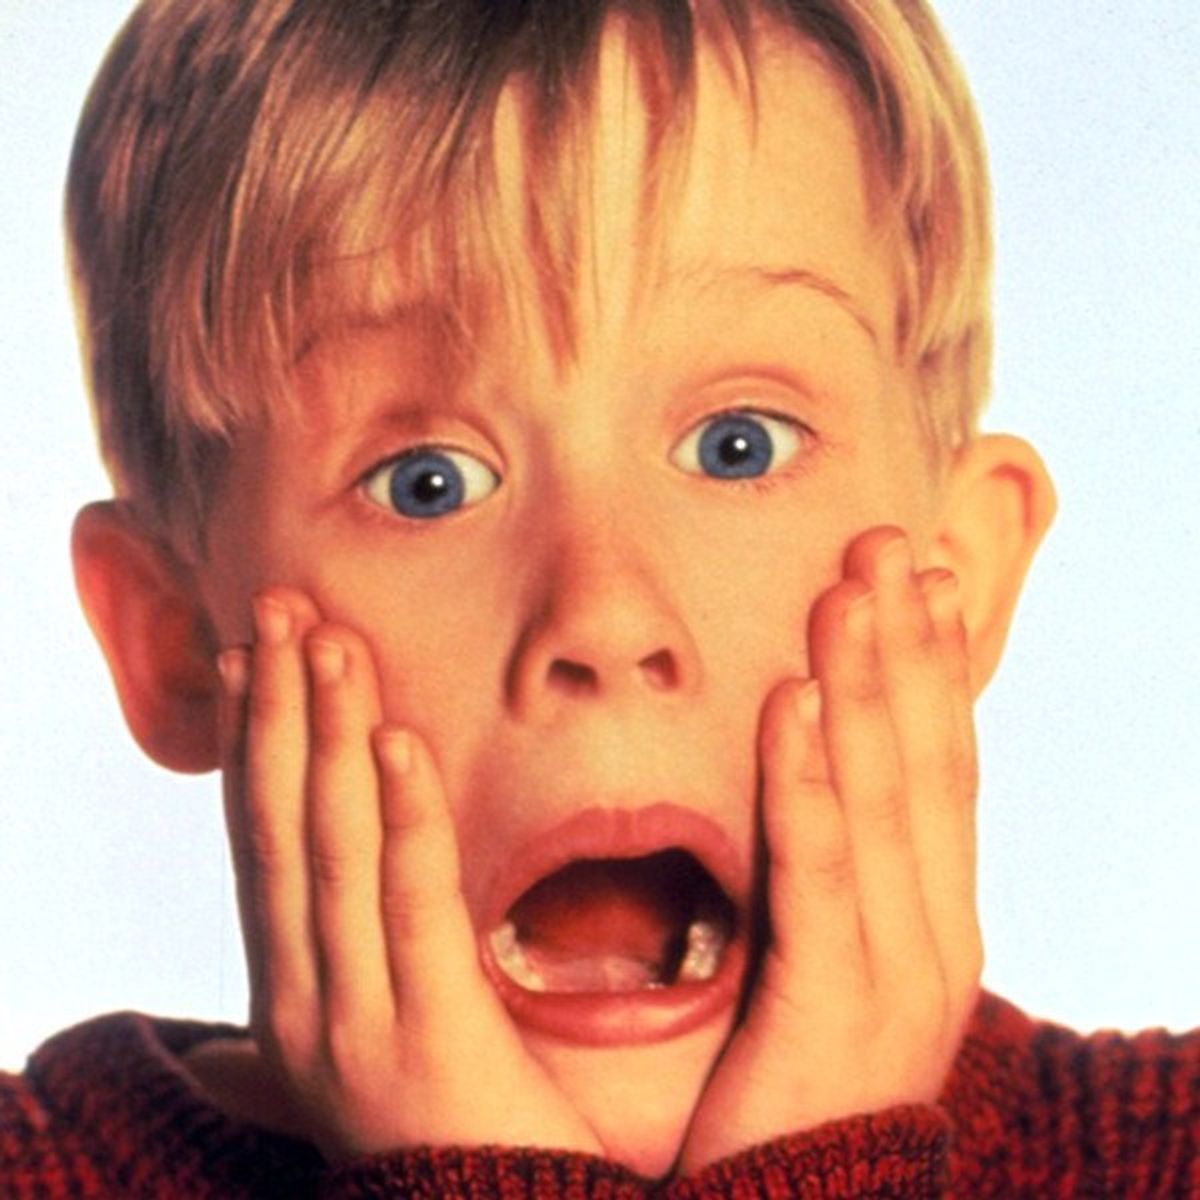 If These 11 'Home Alone' Injuries Were Realistic